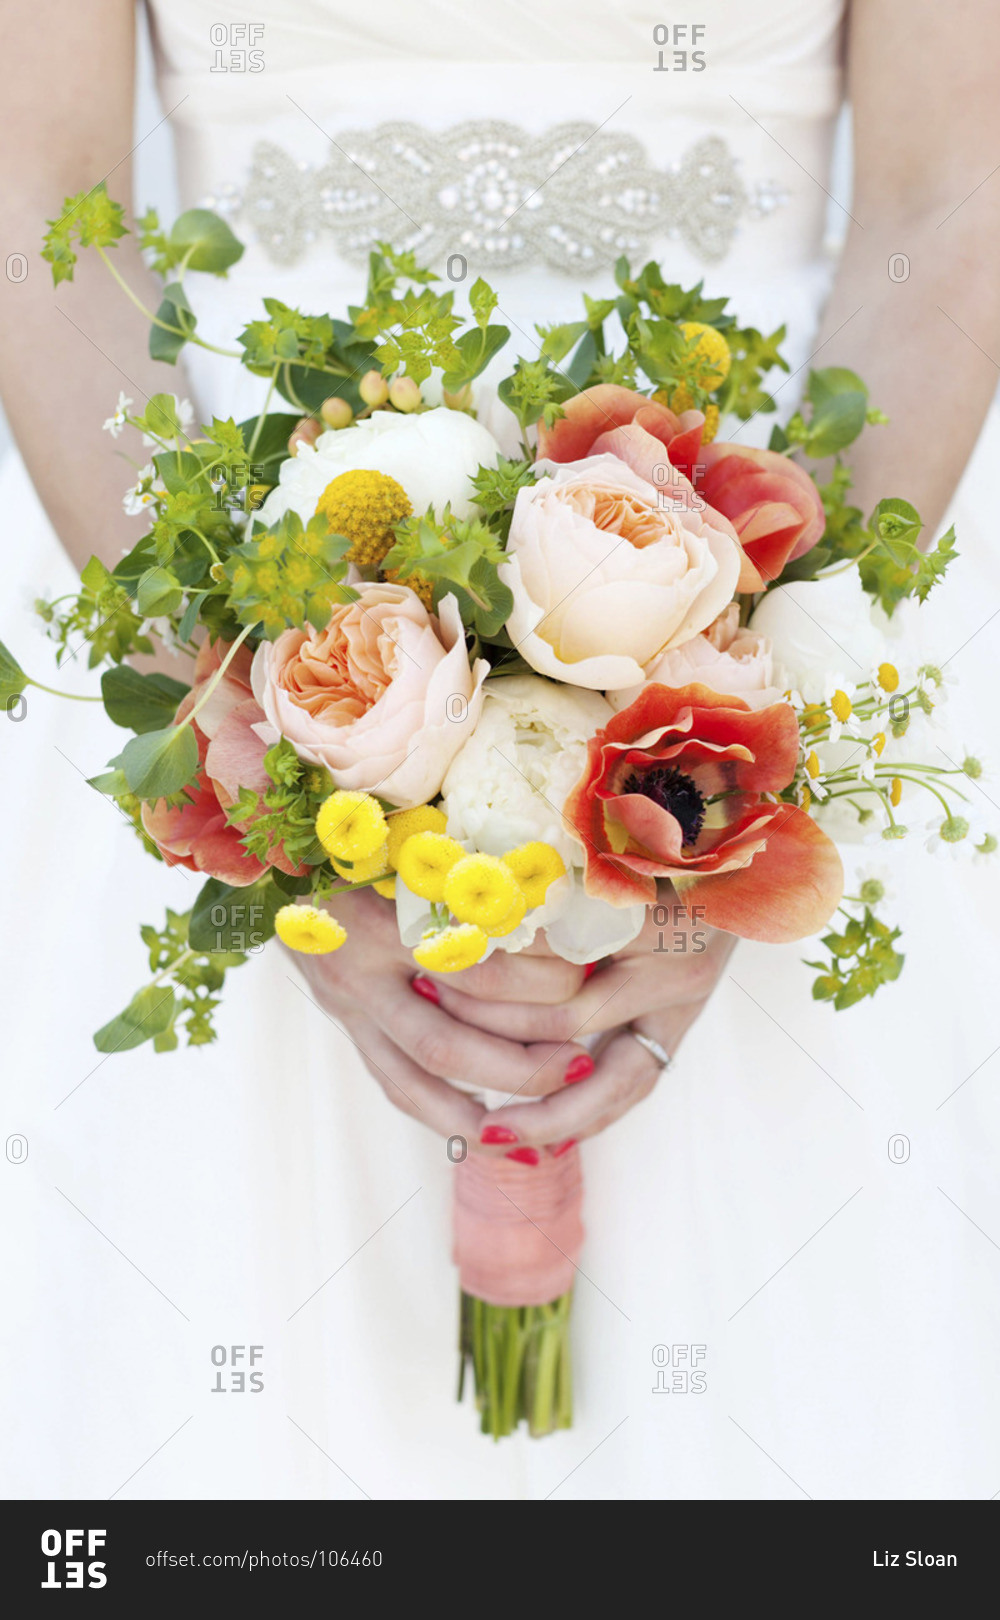 Mid section view of bride holding colorful bridal bouquet